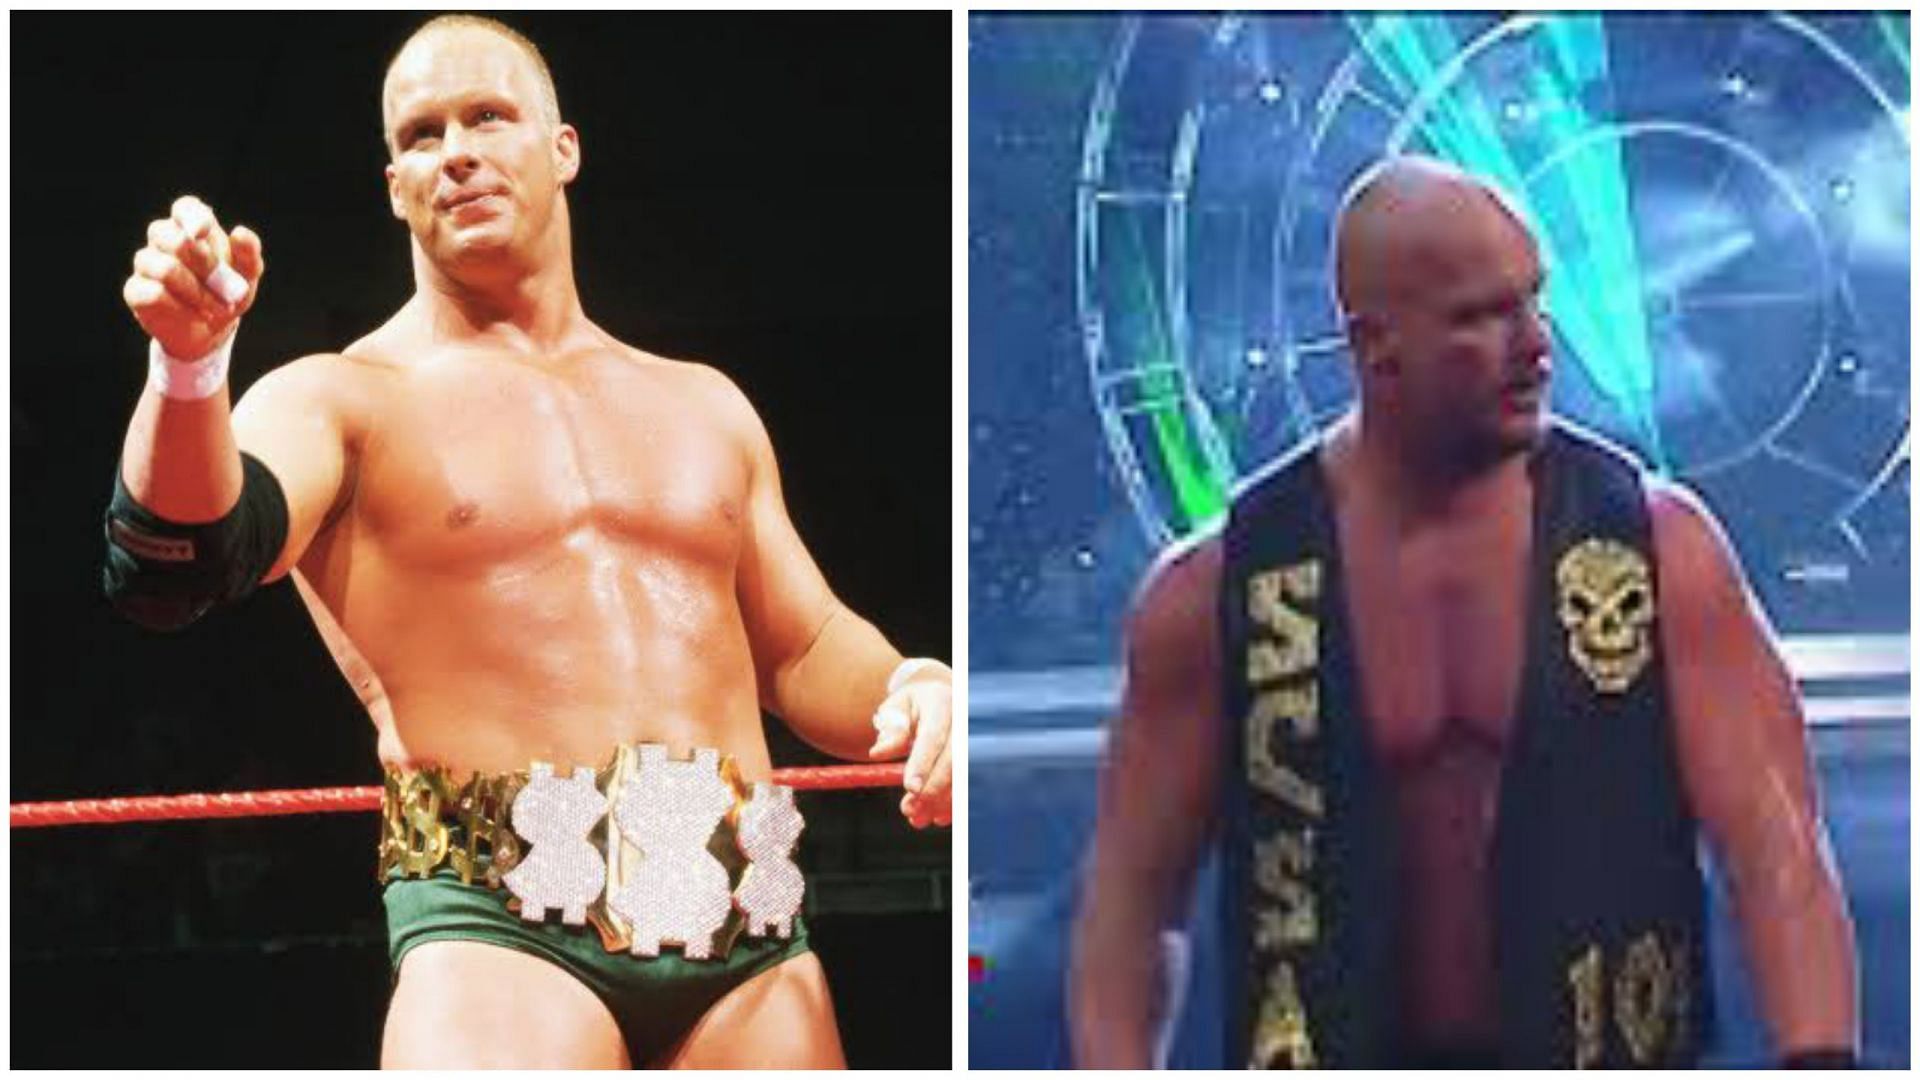 Stone Cold Steve Austin has entered the Royal Rumble match six times.